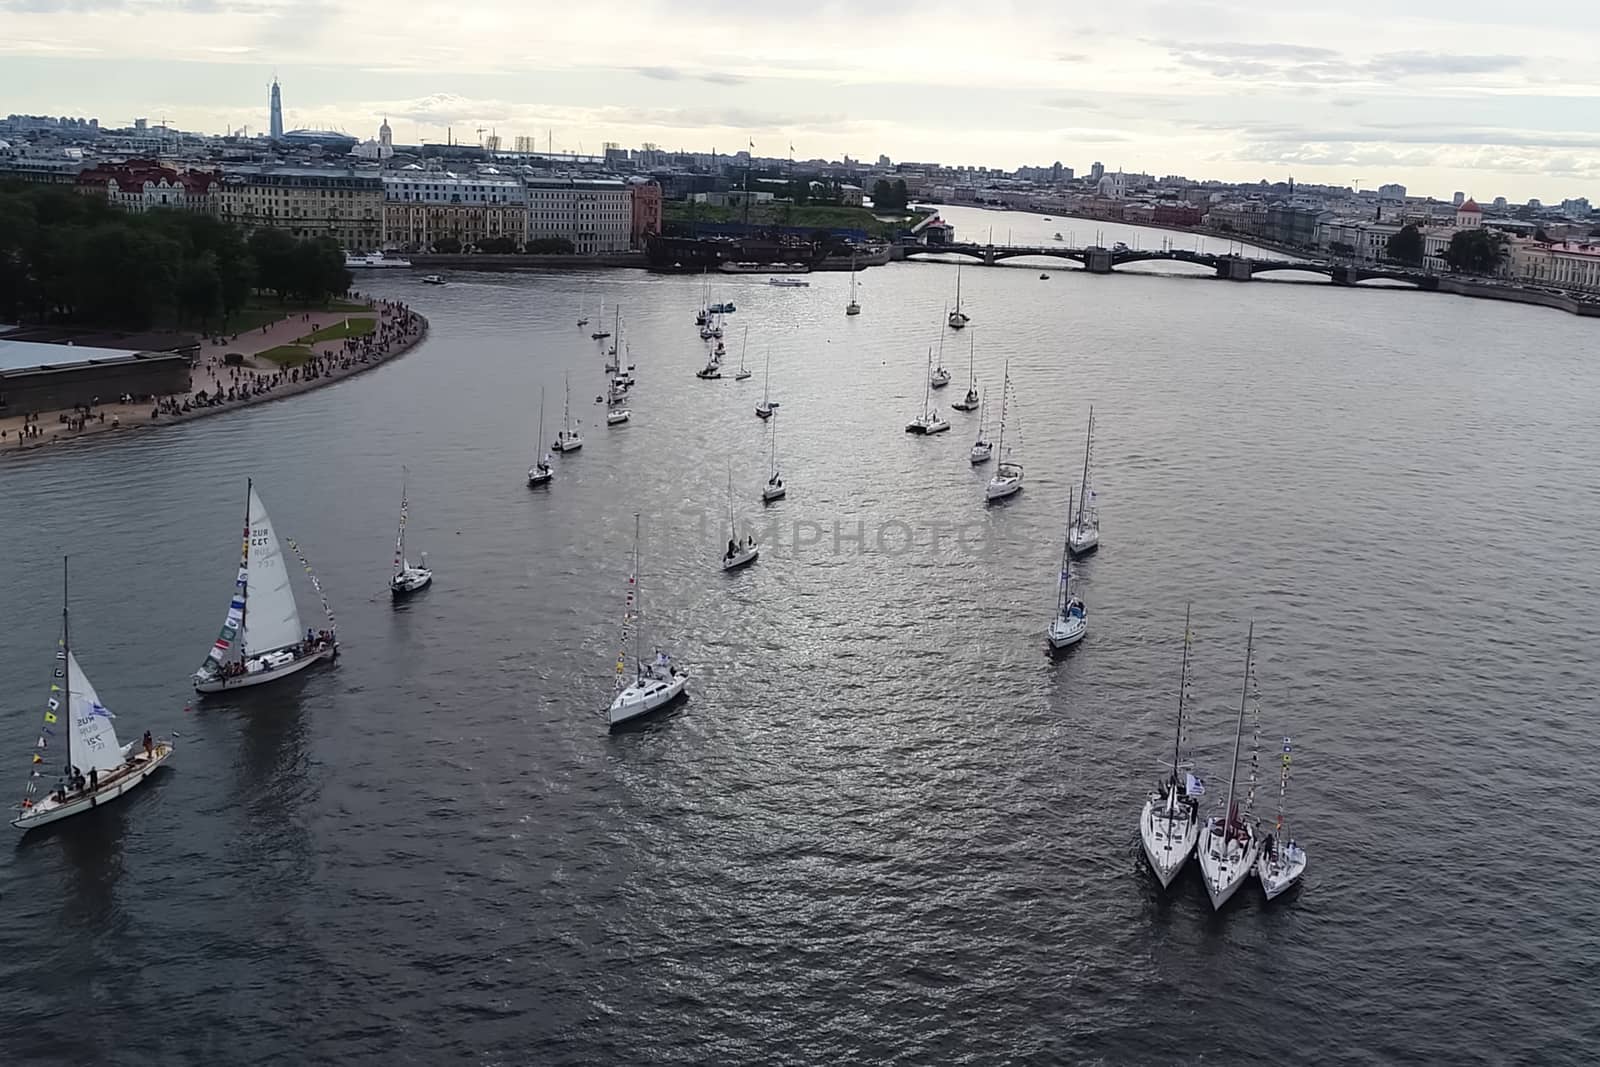 St. Petersburg, Russia - July 24, 2017: Festival of yachts in St. Petersburg on the river neve. Sailing yachts in the river.